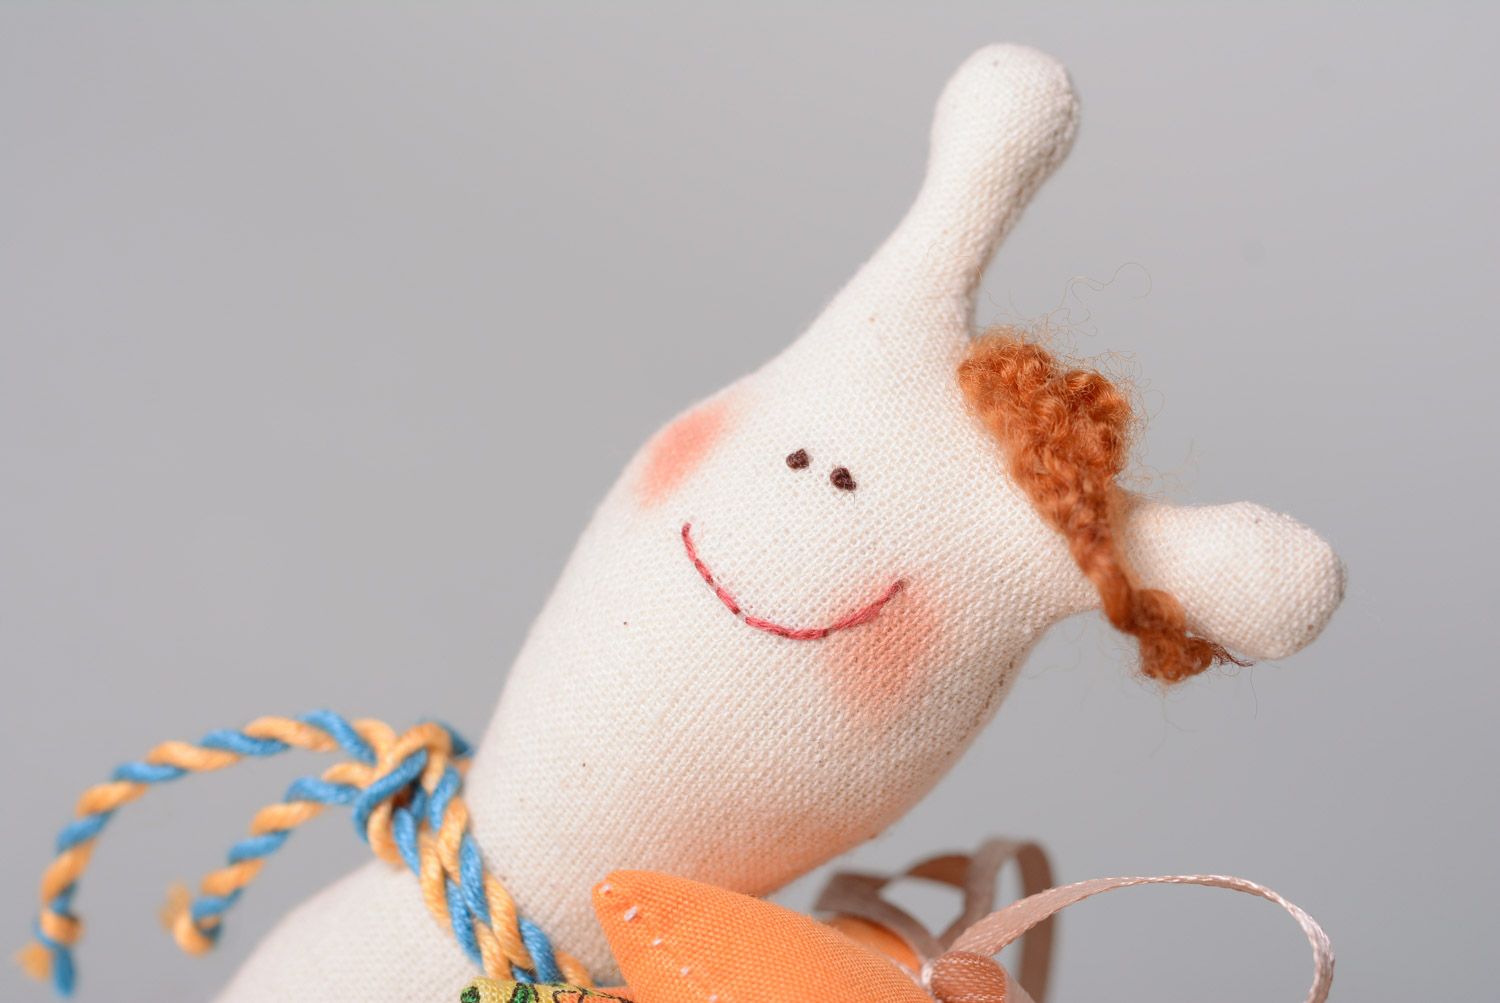 Small handmade designer soft toy sewn of natural fabrics in the shape of snail photo 2